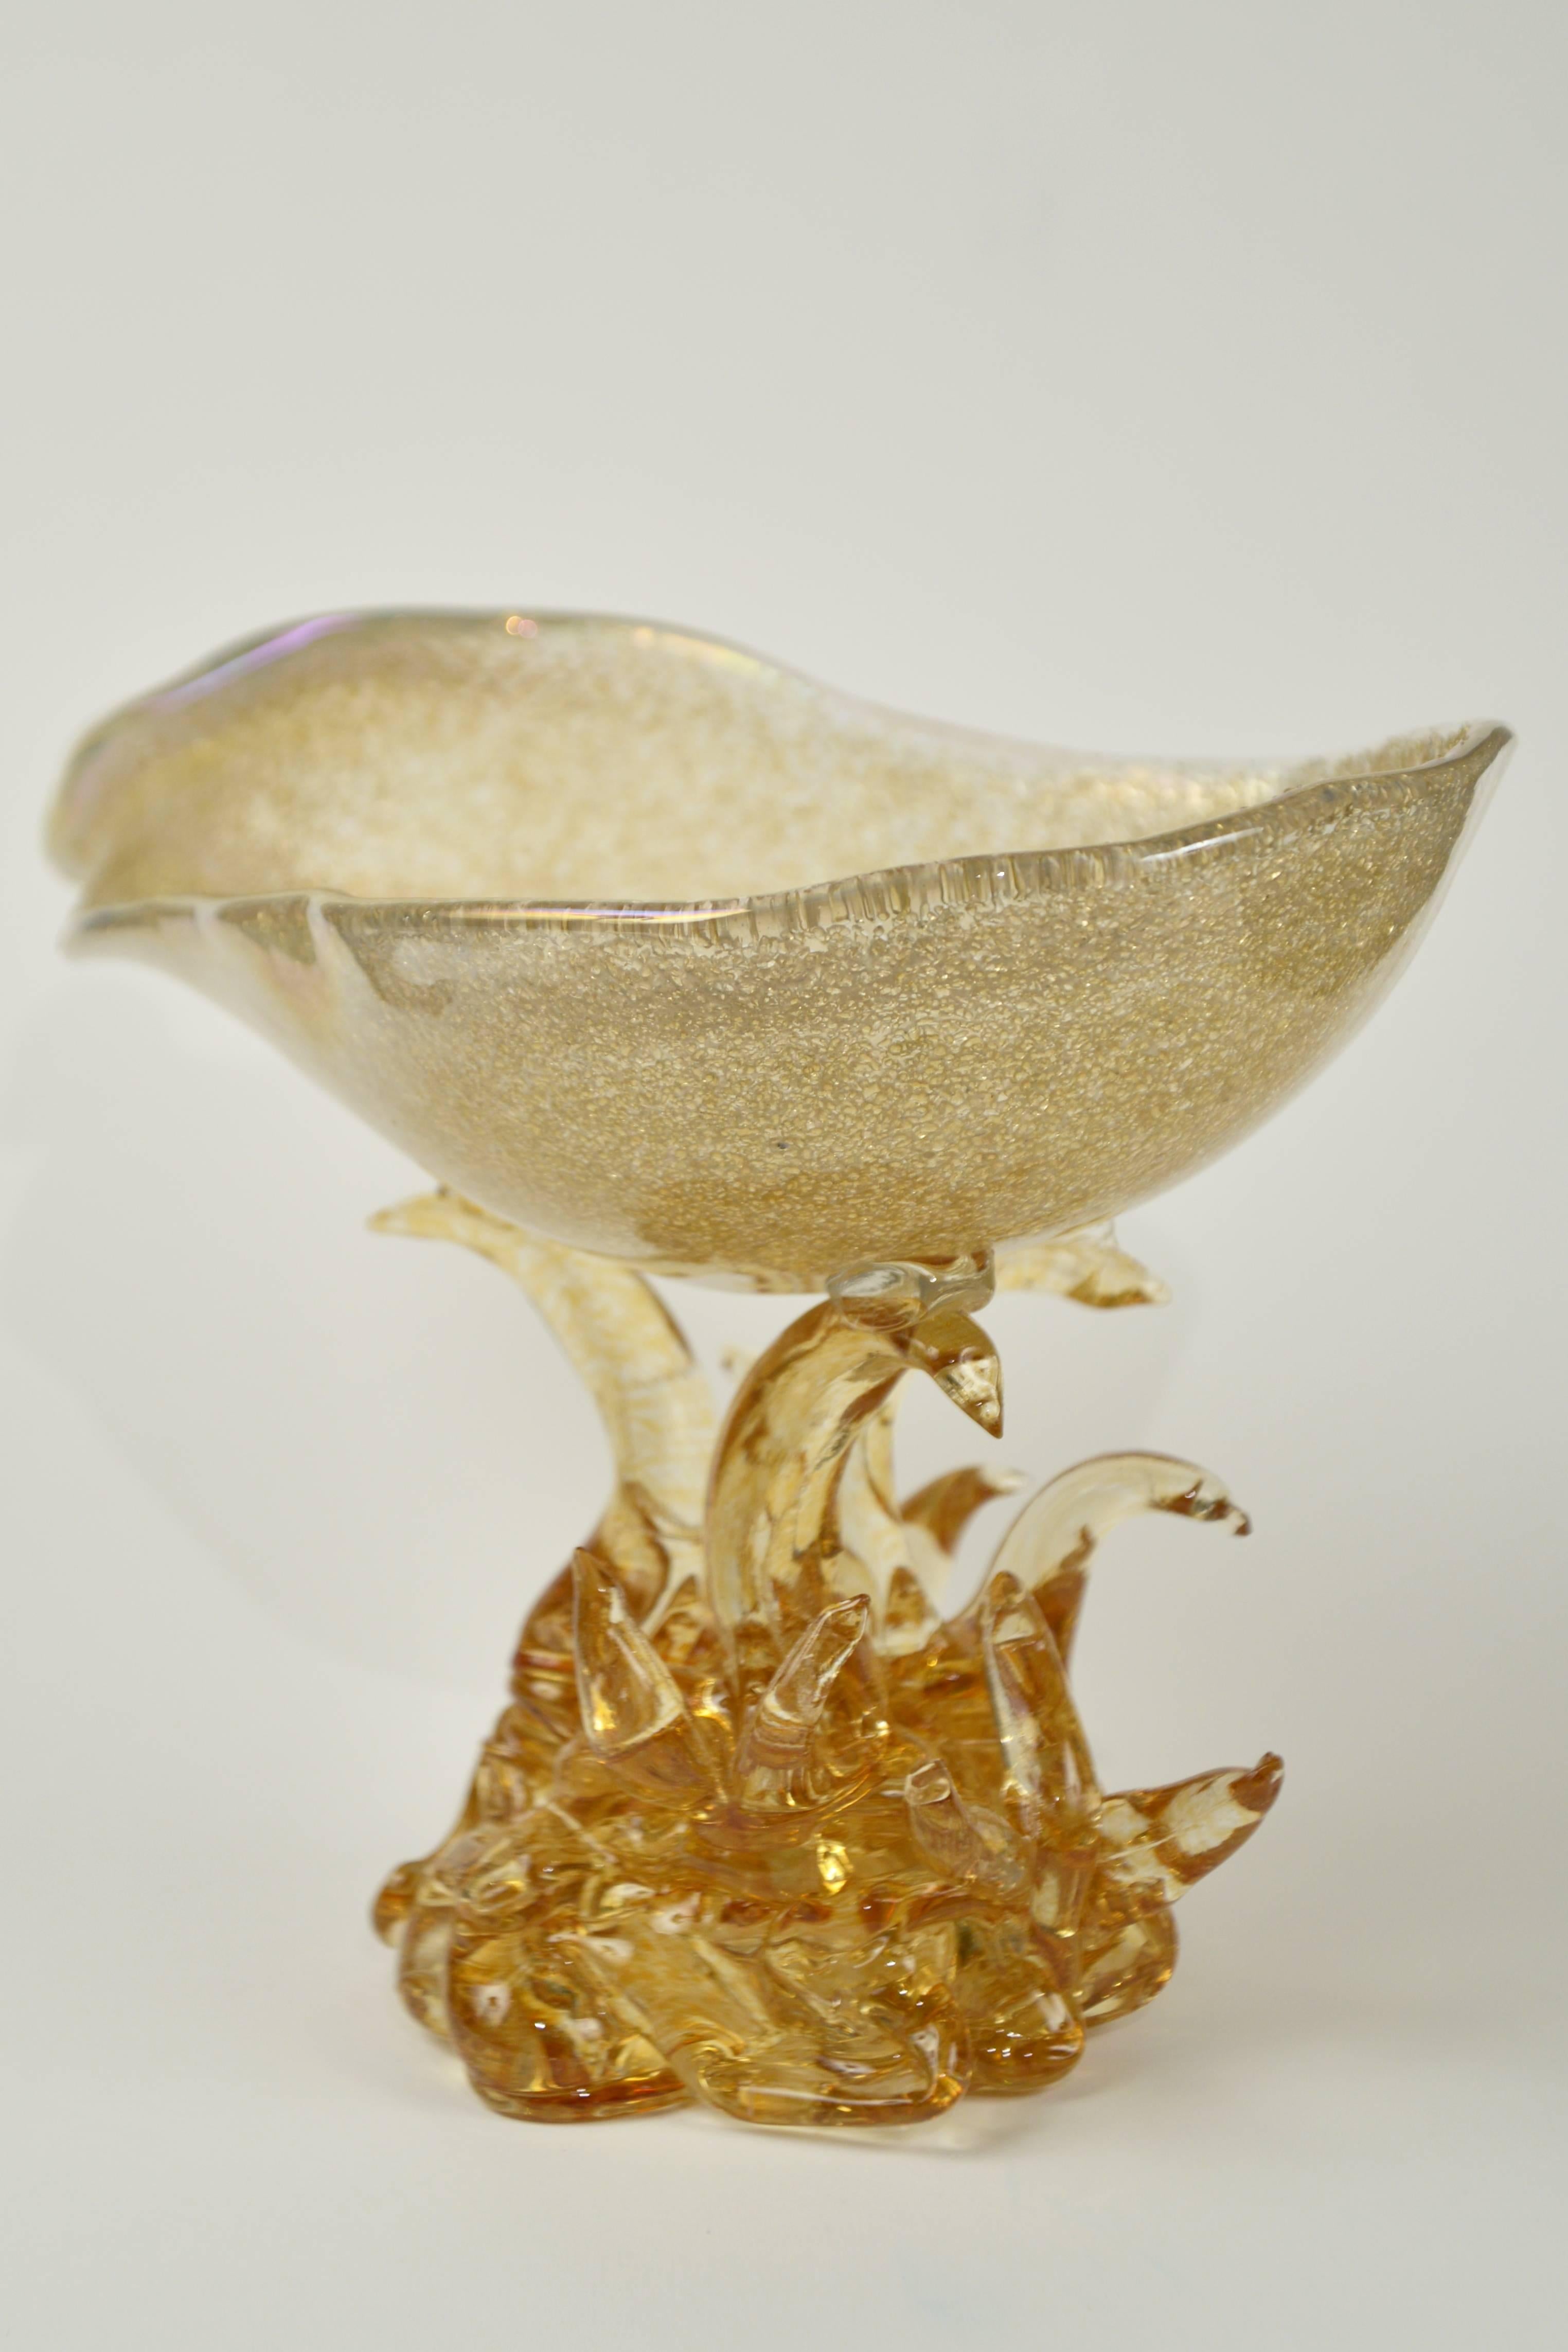 Amber colored “rugiadoso” glass with gold dust inclusions throughout. A seashell-shaped dish held by a stylized algae amber colored glass base. Model “Coppa Rugiada” introduced during the Venetian Biennale in 1940.
Pictured in Leonarde Arte “Il